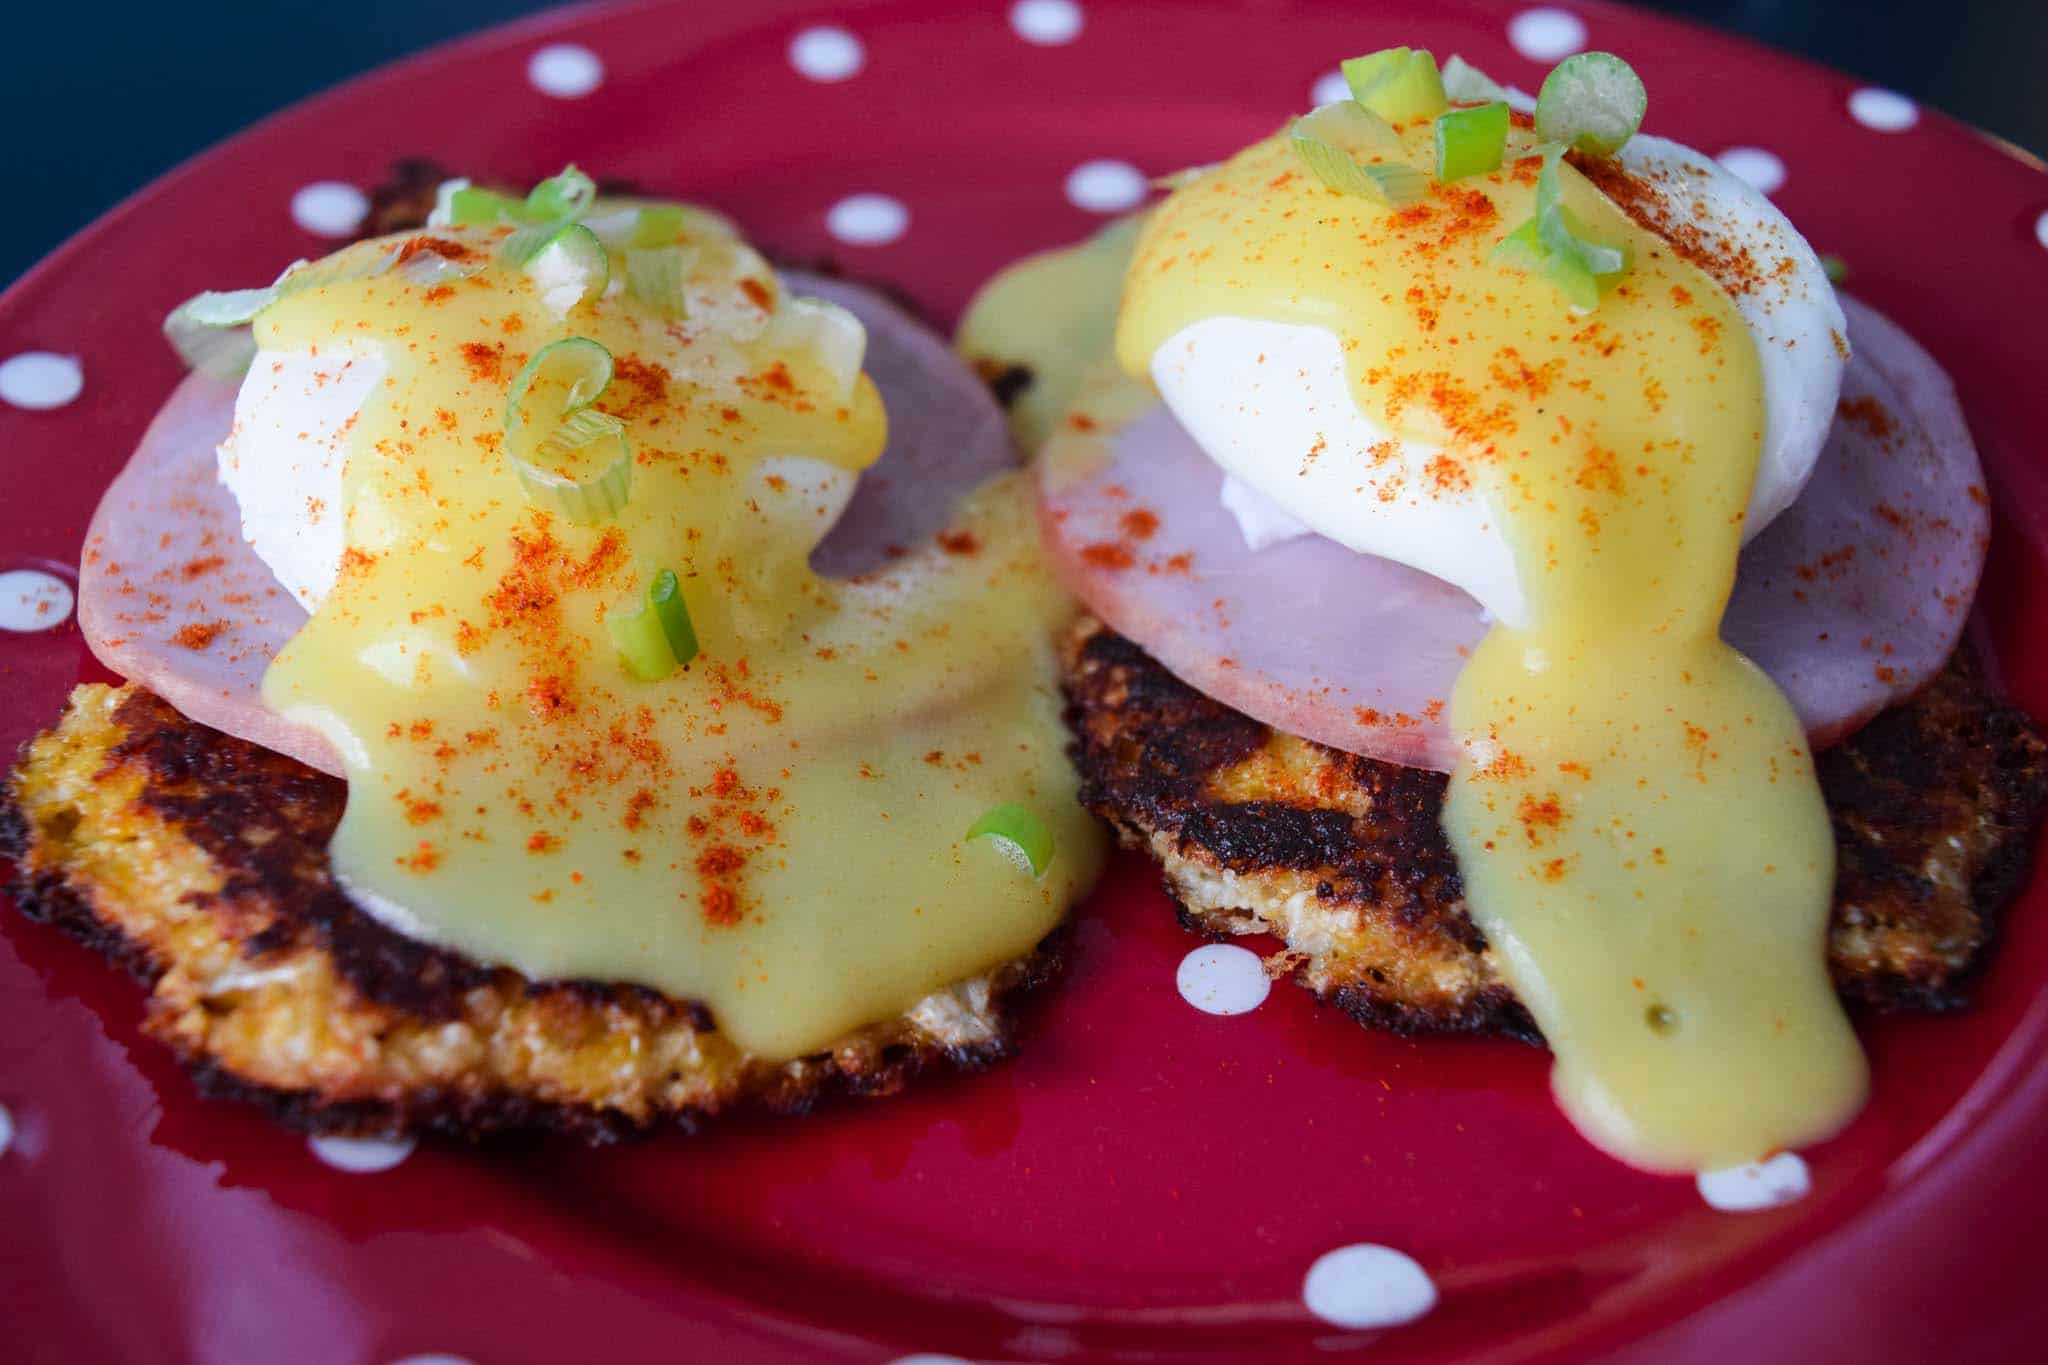 cauliflower benedict on red plate topped with hollandaise sauce close up